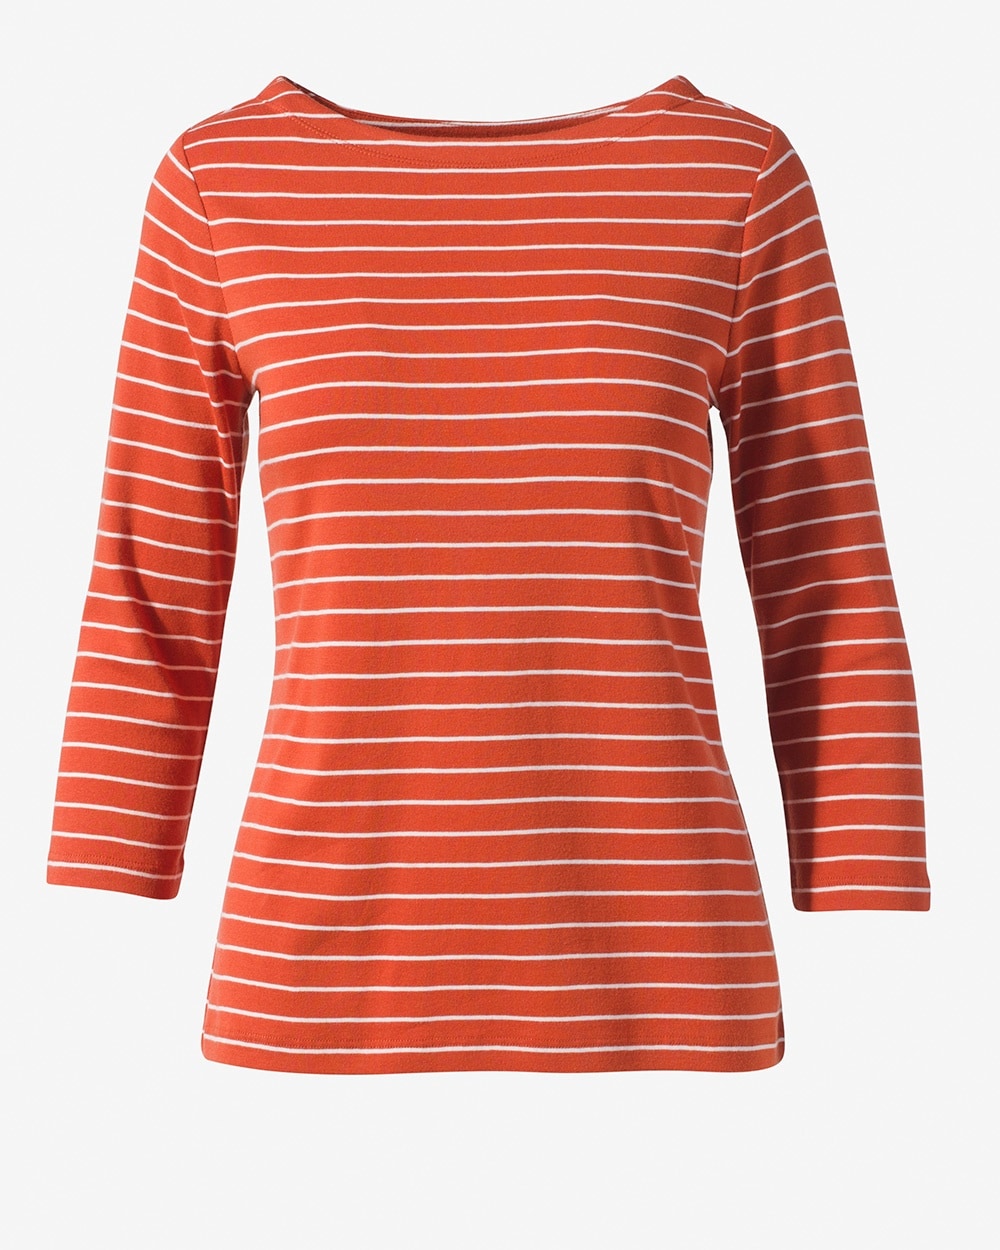 Classic Stripes Boat-Neck 3/4-Sleeve Tee